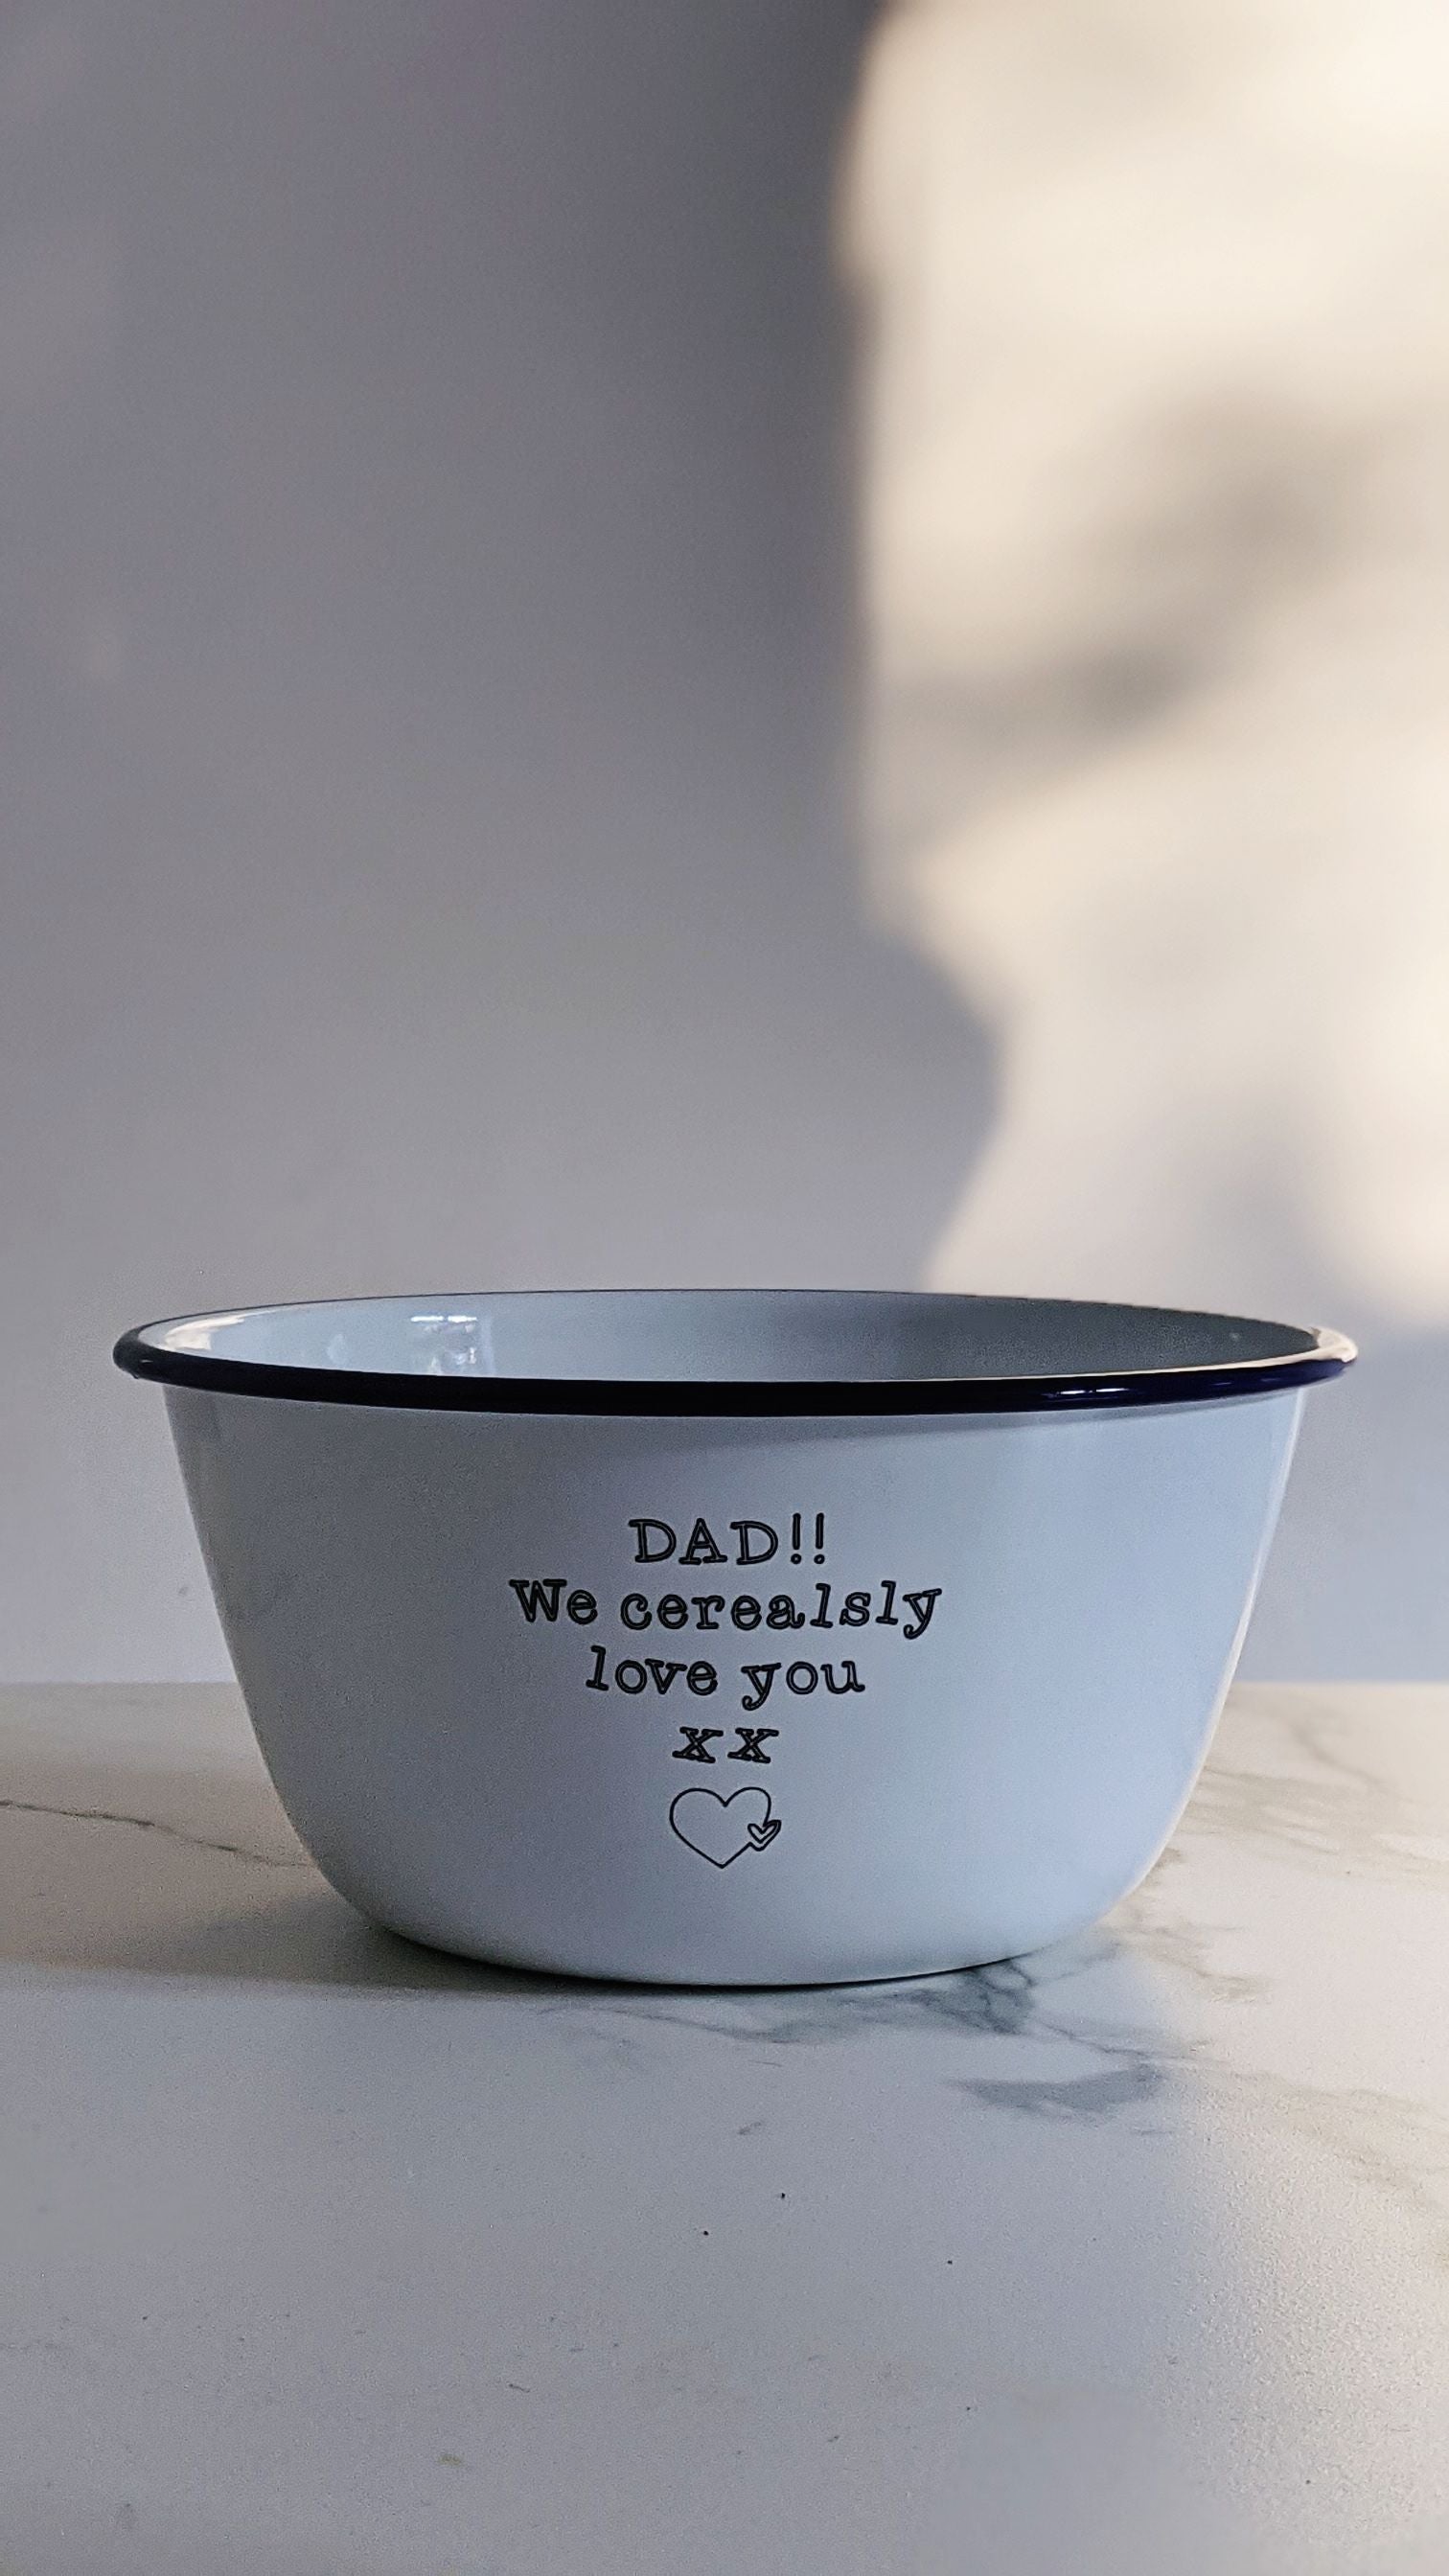 Personalised I Cerealsly Love You - Engraved Enamel Breakfast Bowl - One Mama One Shed